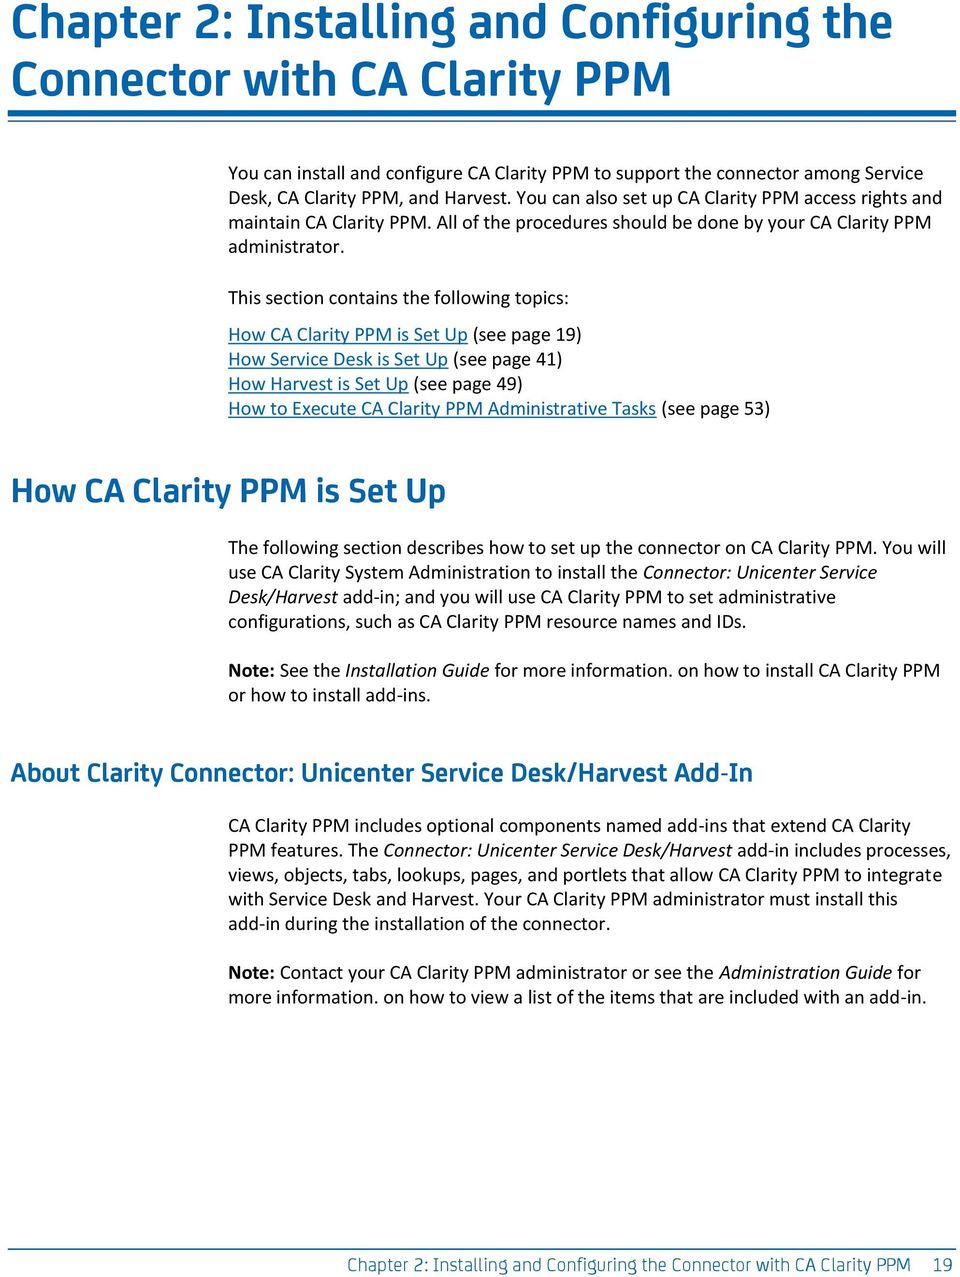 This section contains the following topics: How CA Clarity PPM is Set Up (see page 19) How Service Desk is Set Up (see page 41) How Harvest is Set Up (see page 49) How to Execute CA Clarity PPM